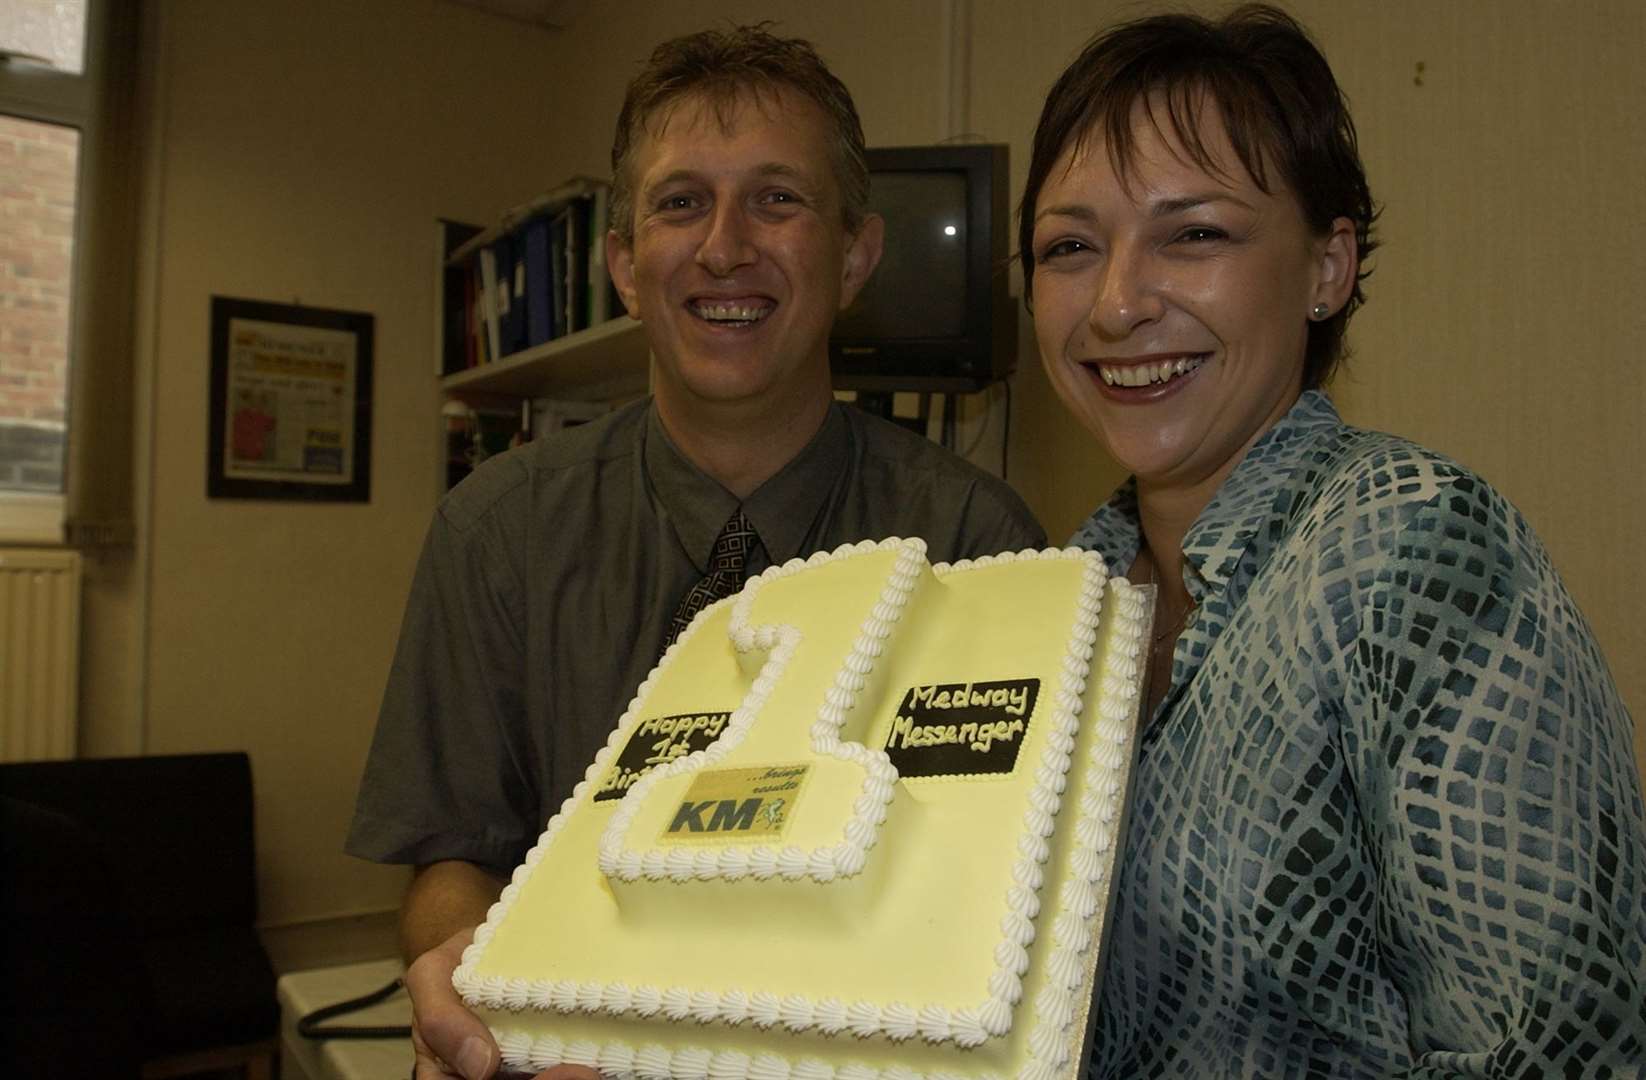 Celebrating Medway Messenger's first birthday, Bob Dimond and Nikki White with a cake